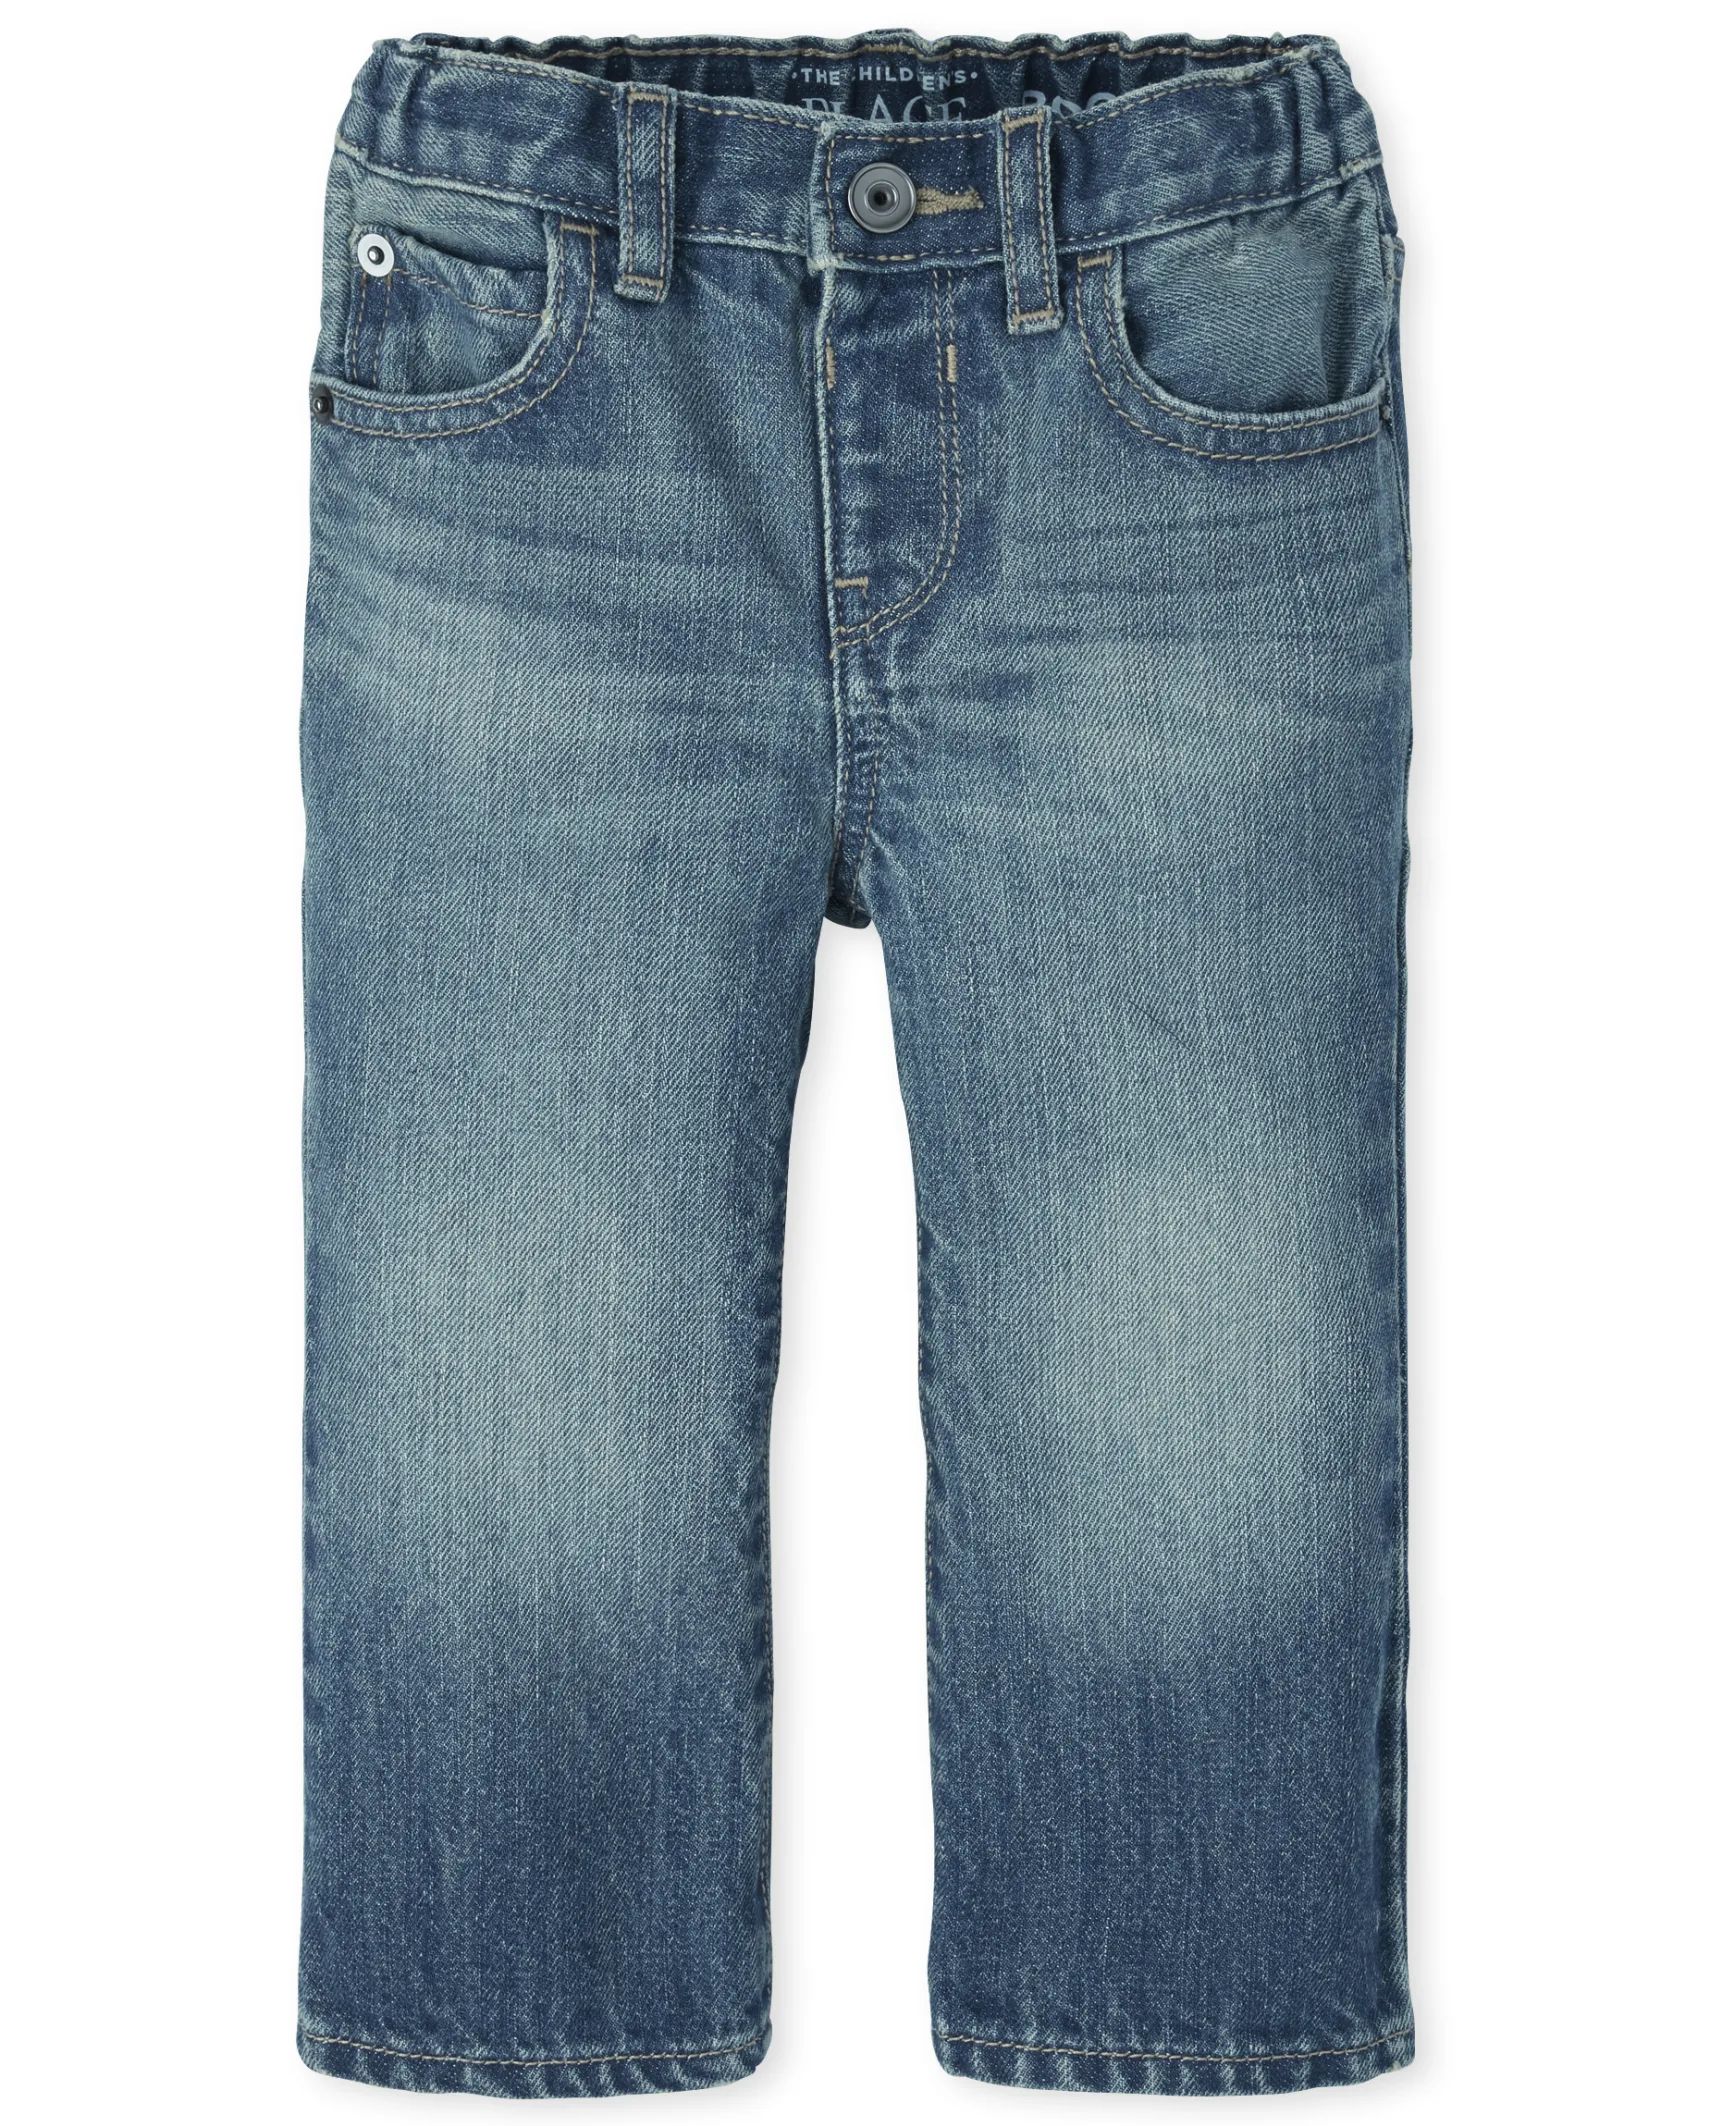 Baby And Toddler Boys Basic Bootcut Jeans - pierce wash | The Children's Place